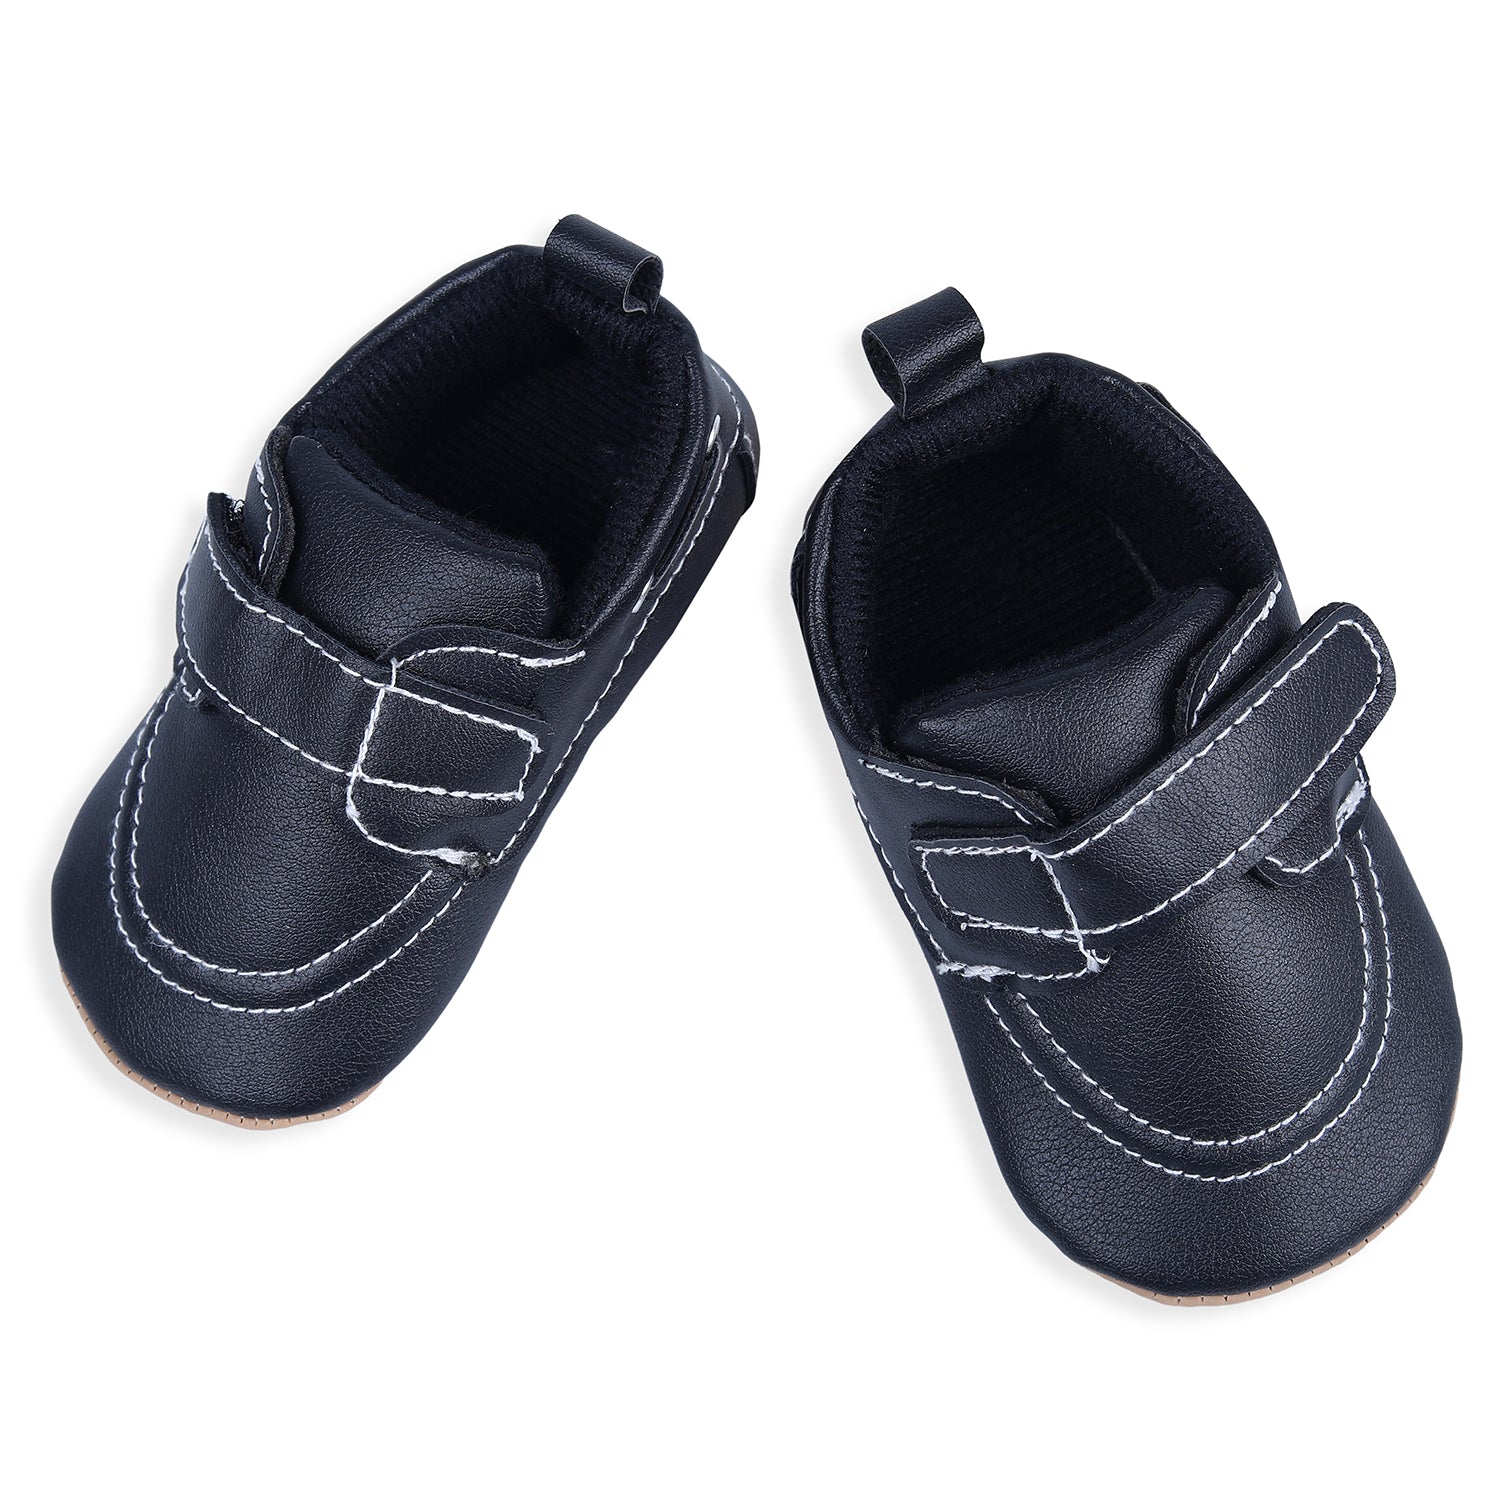 Solid Hookloop Stylish Leather Velcro Shoes - Black